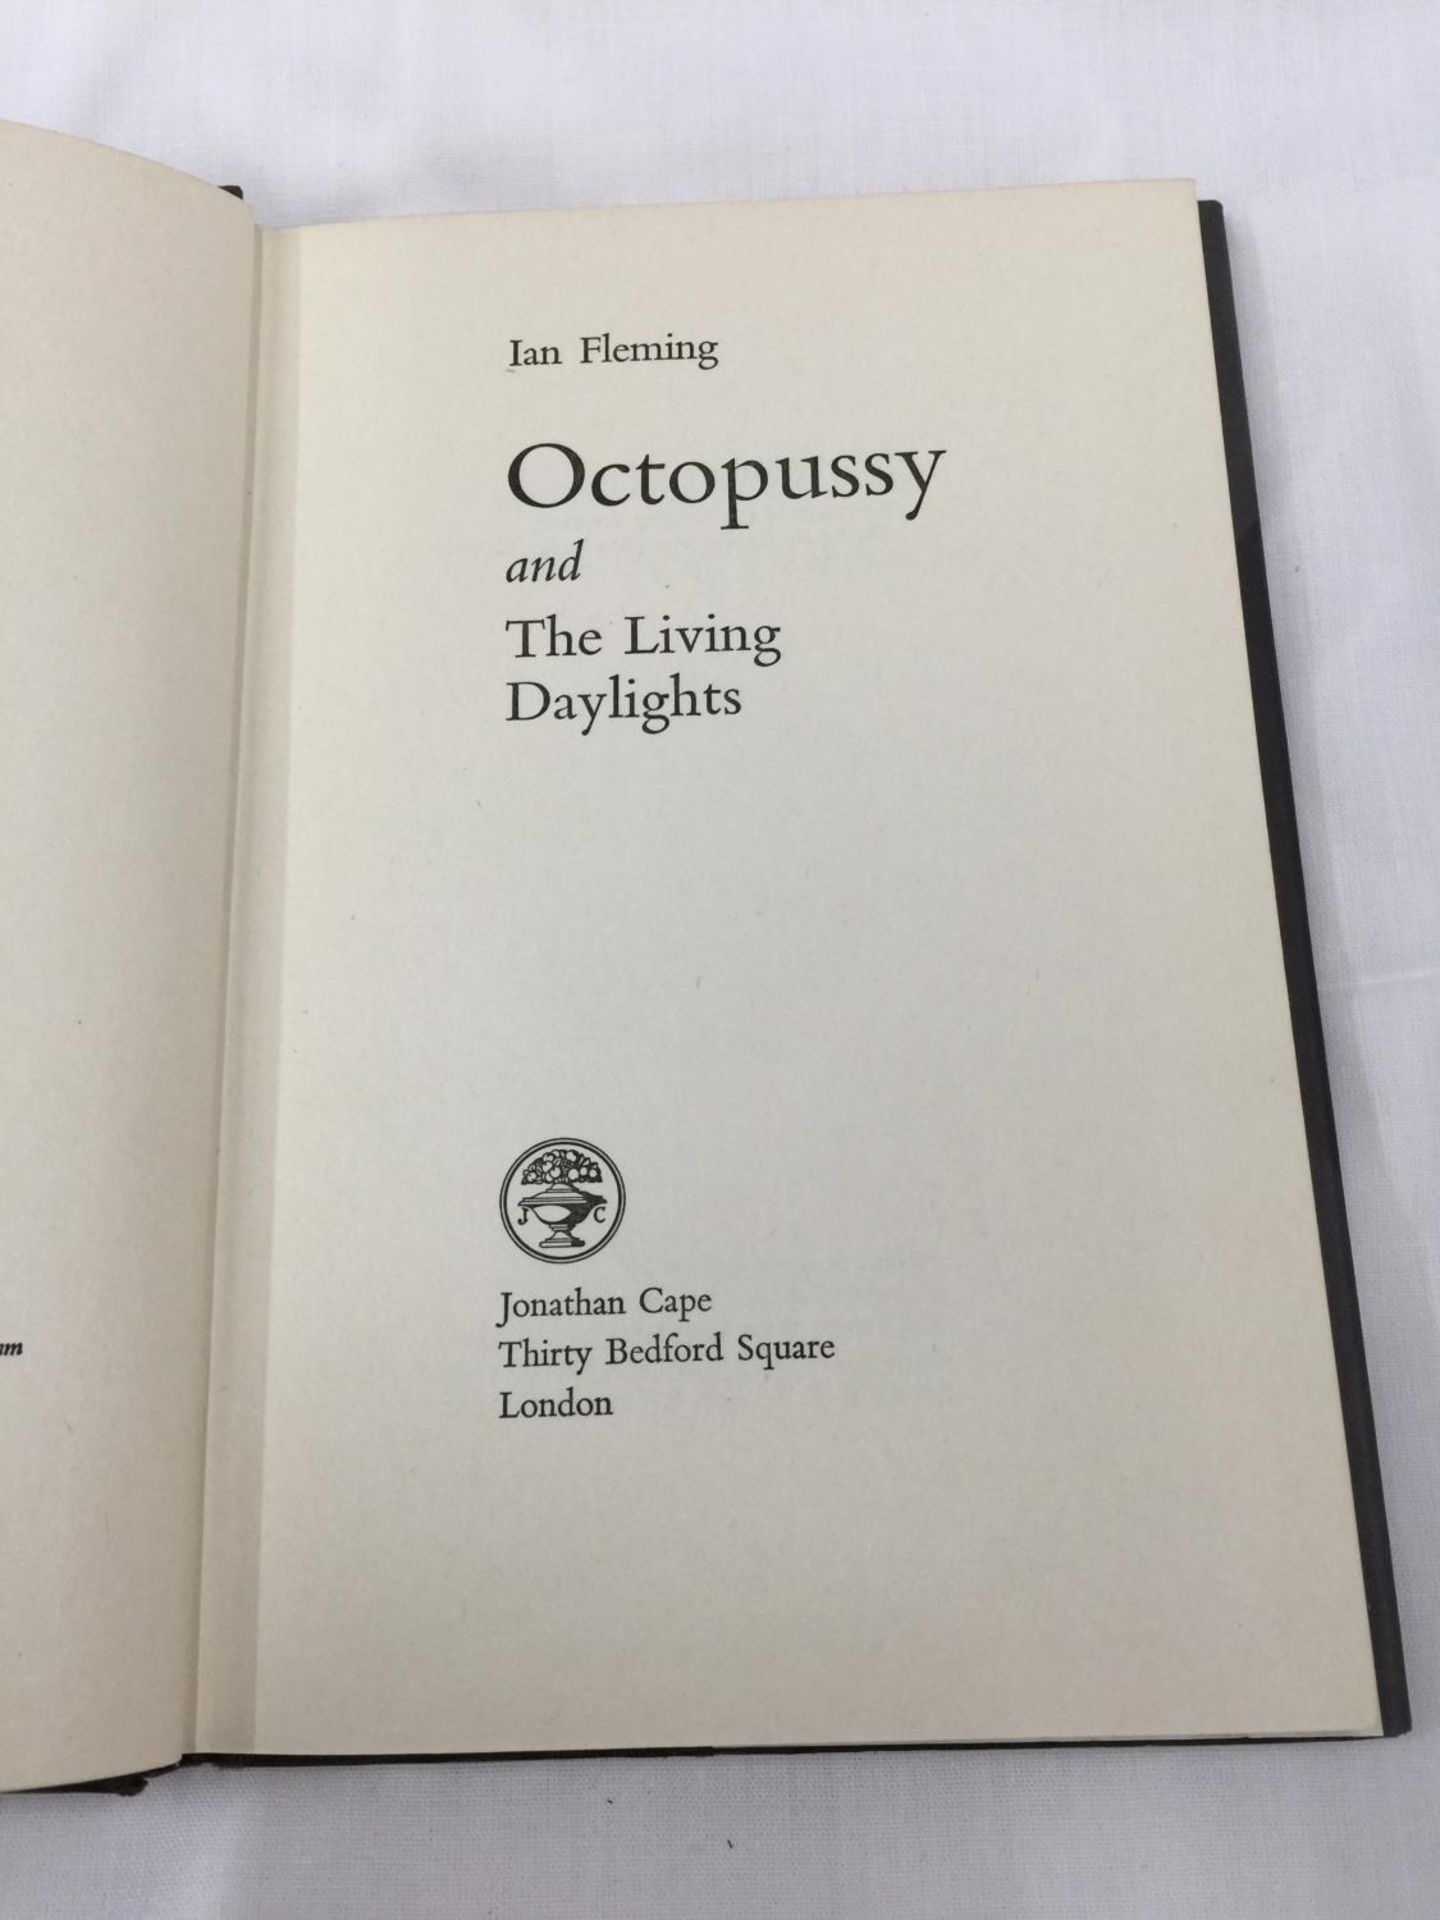 A FIRST EDITION JAMES BOND NOVEL - OCTOPUSSY AND THE LIVING DAYLIGHTS BY IAN FLEMING, HARDBACK - Image 6 of 11